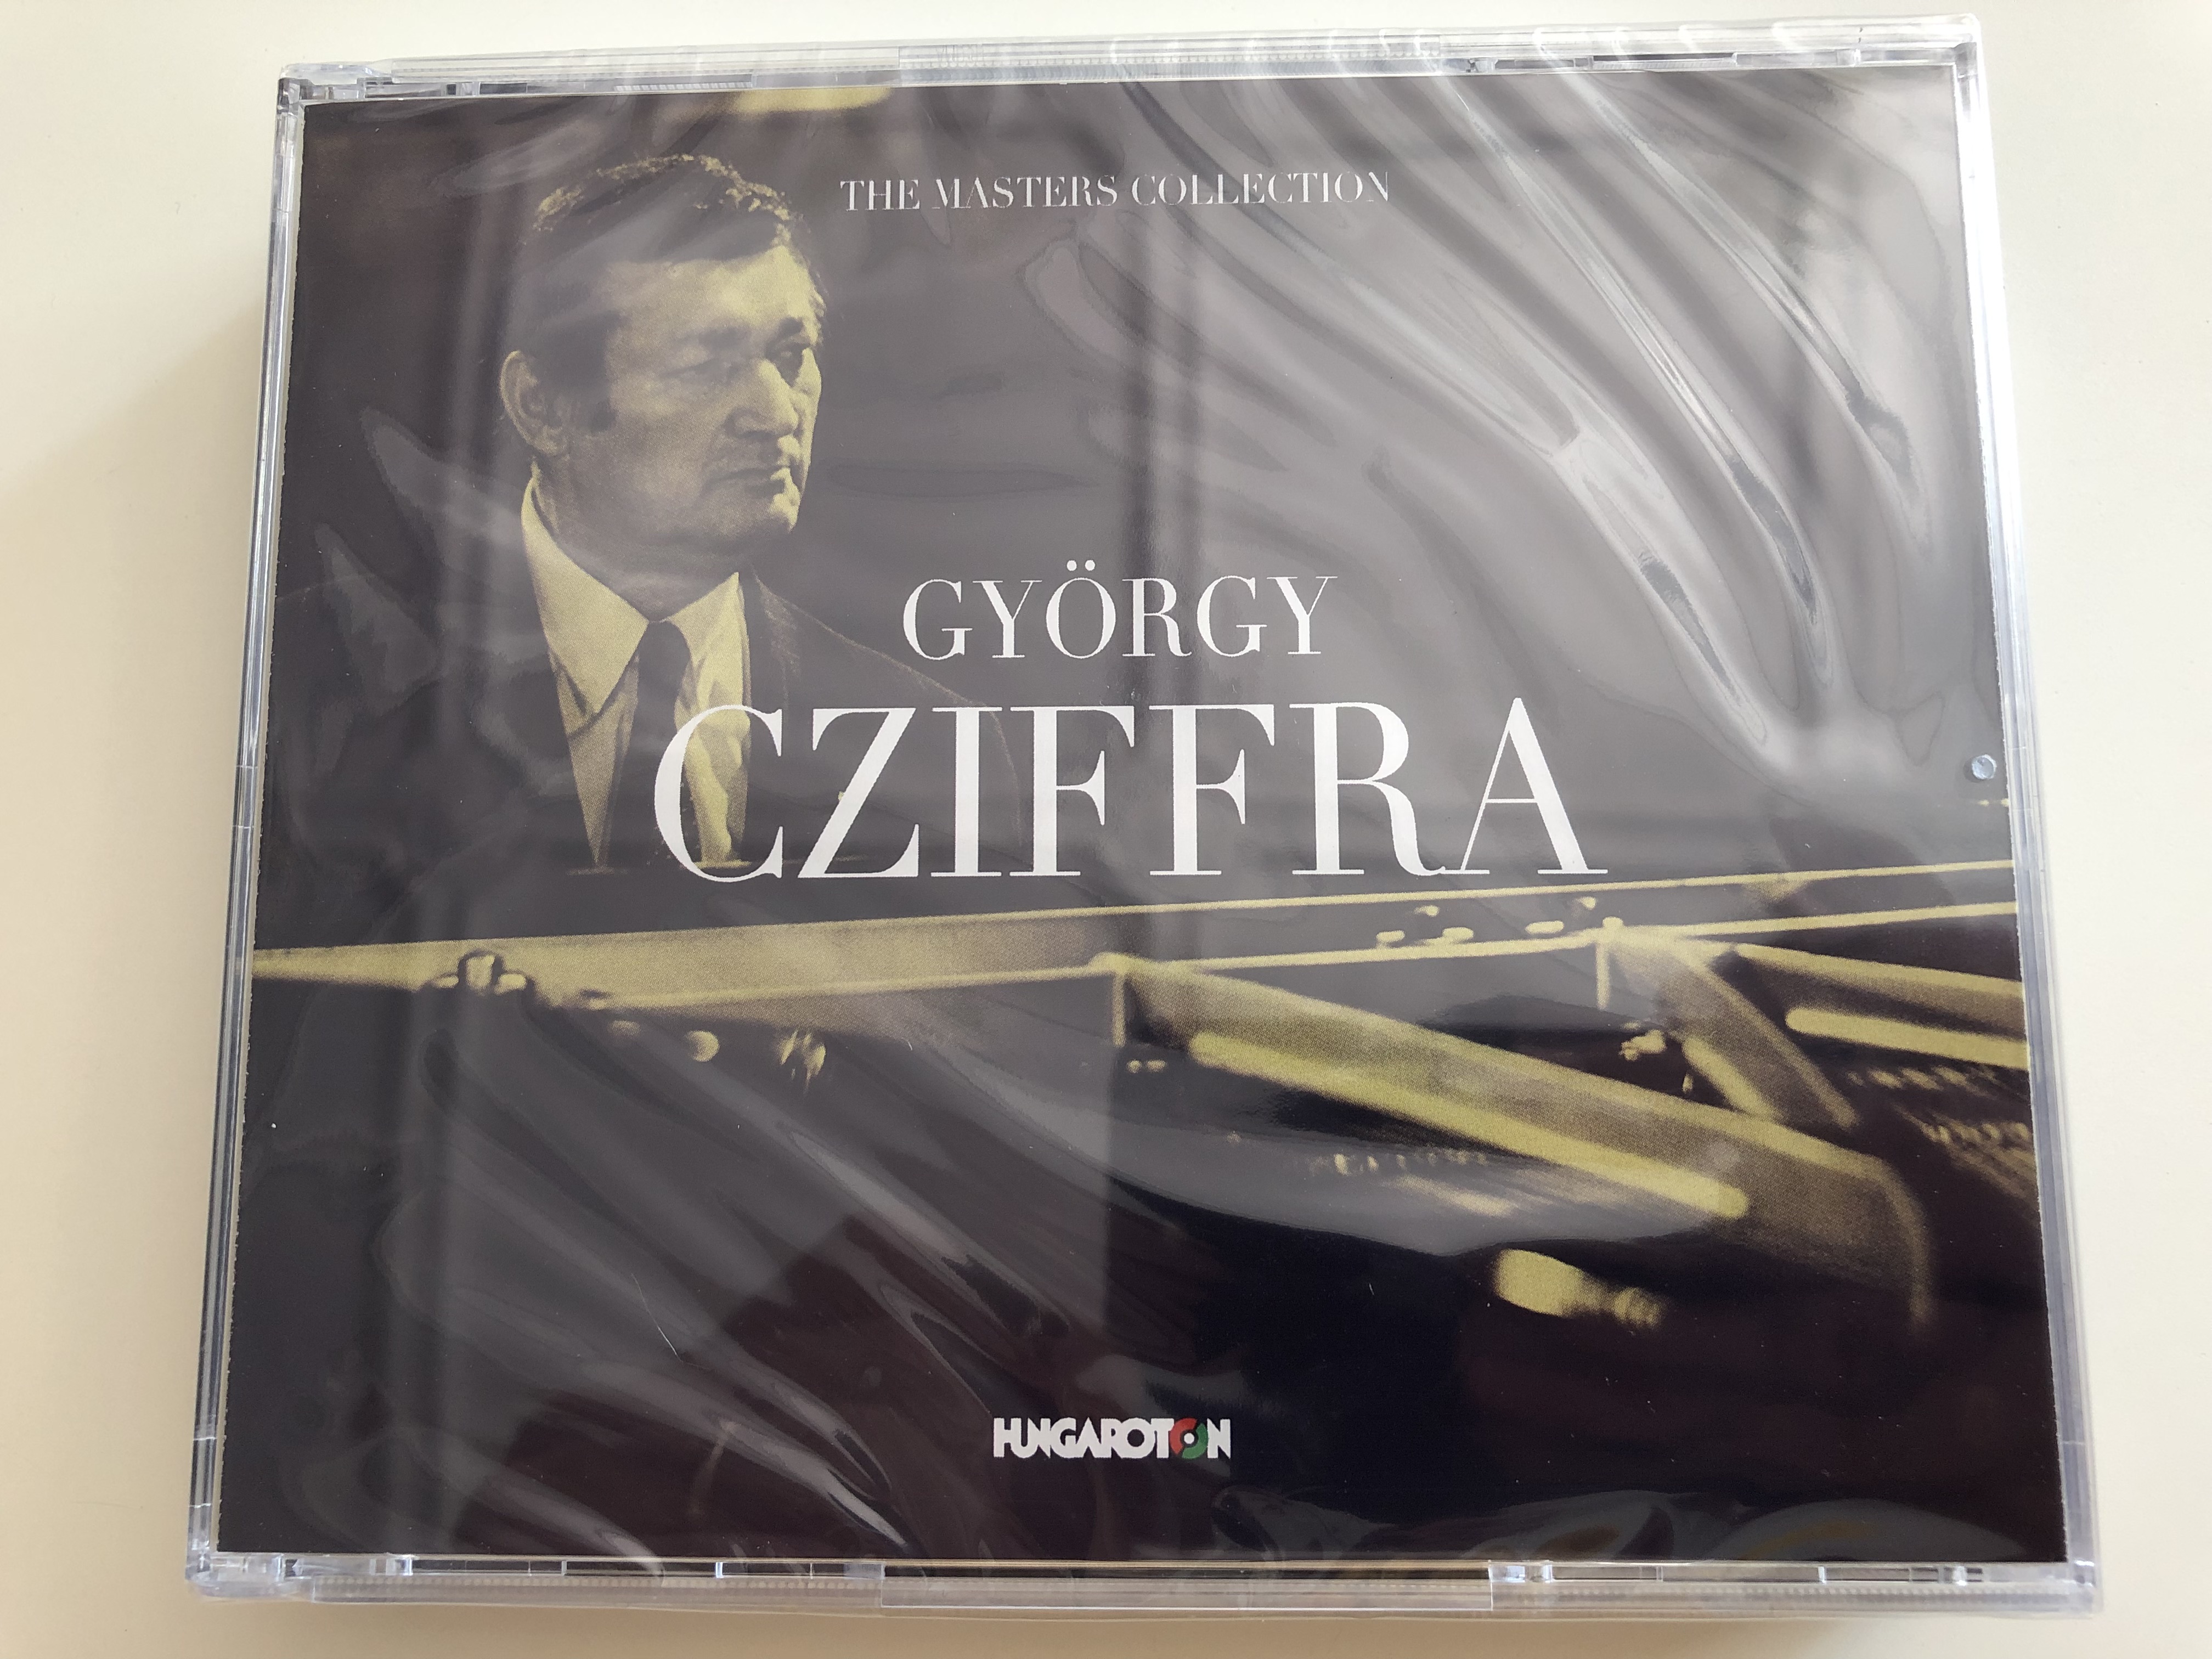 the-masters-collection-gy-rgy-cziffra-audio-cd-2018-iconic-recordings-of-the-most-renowned-artists-of-hungaroton-hcd-32814-16-3-cd-set-1-.jpg